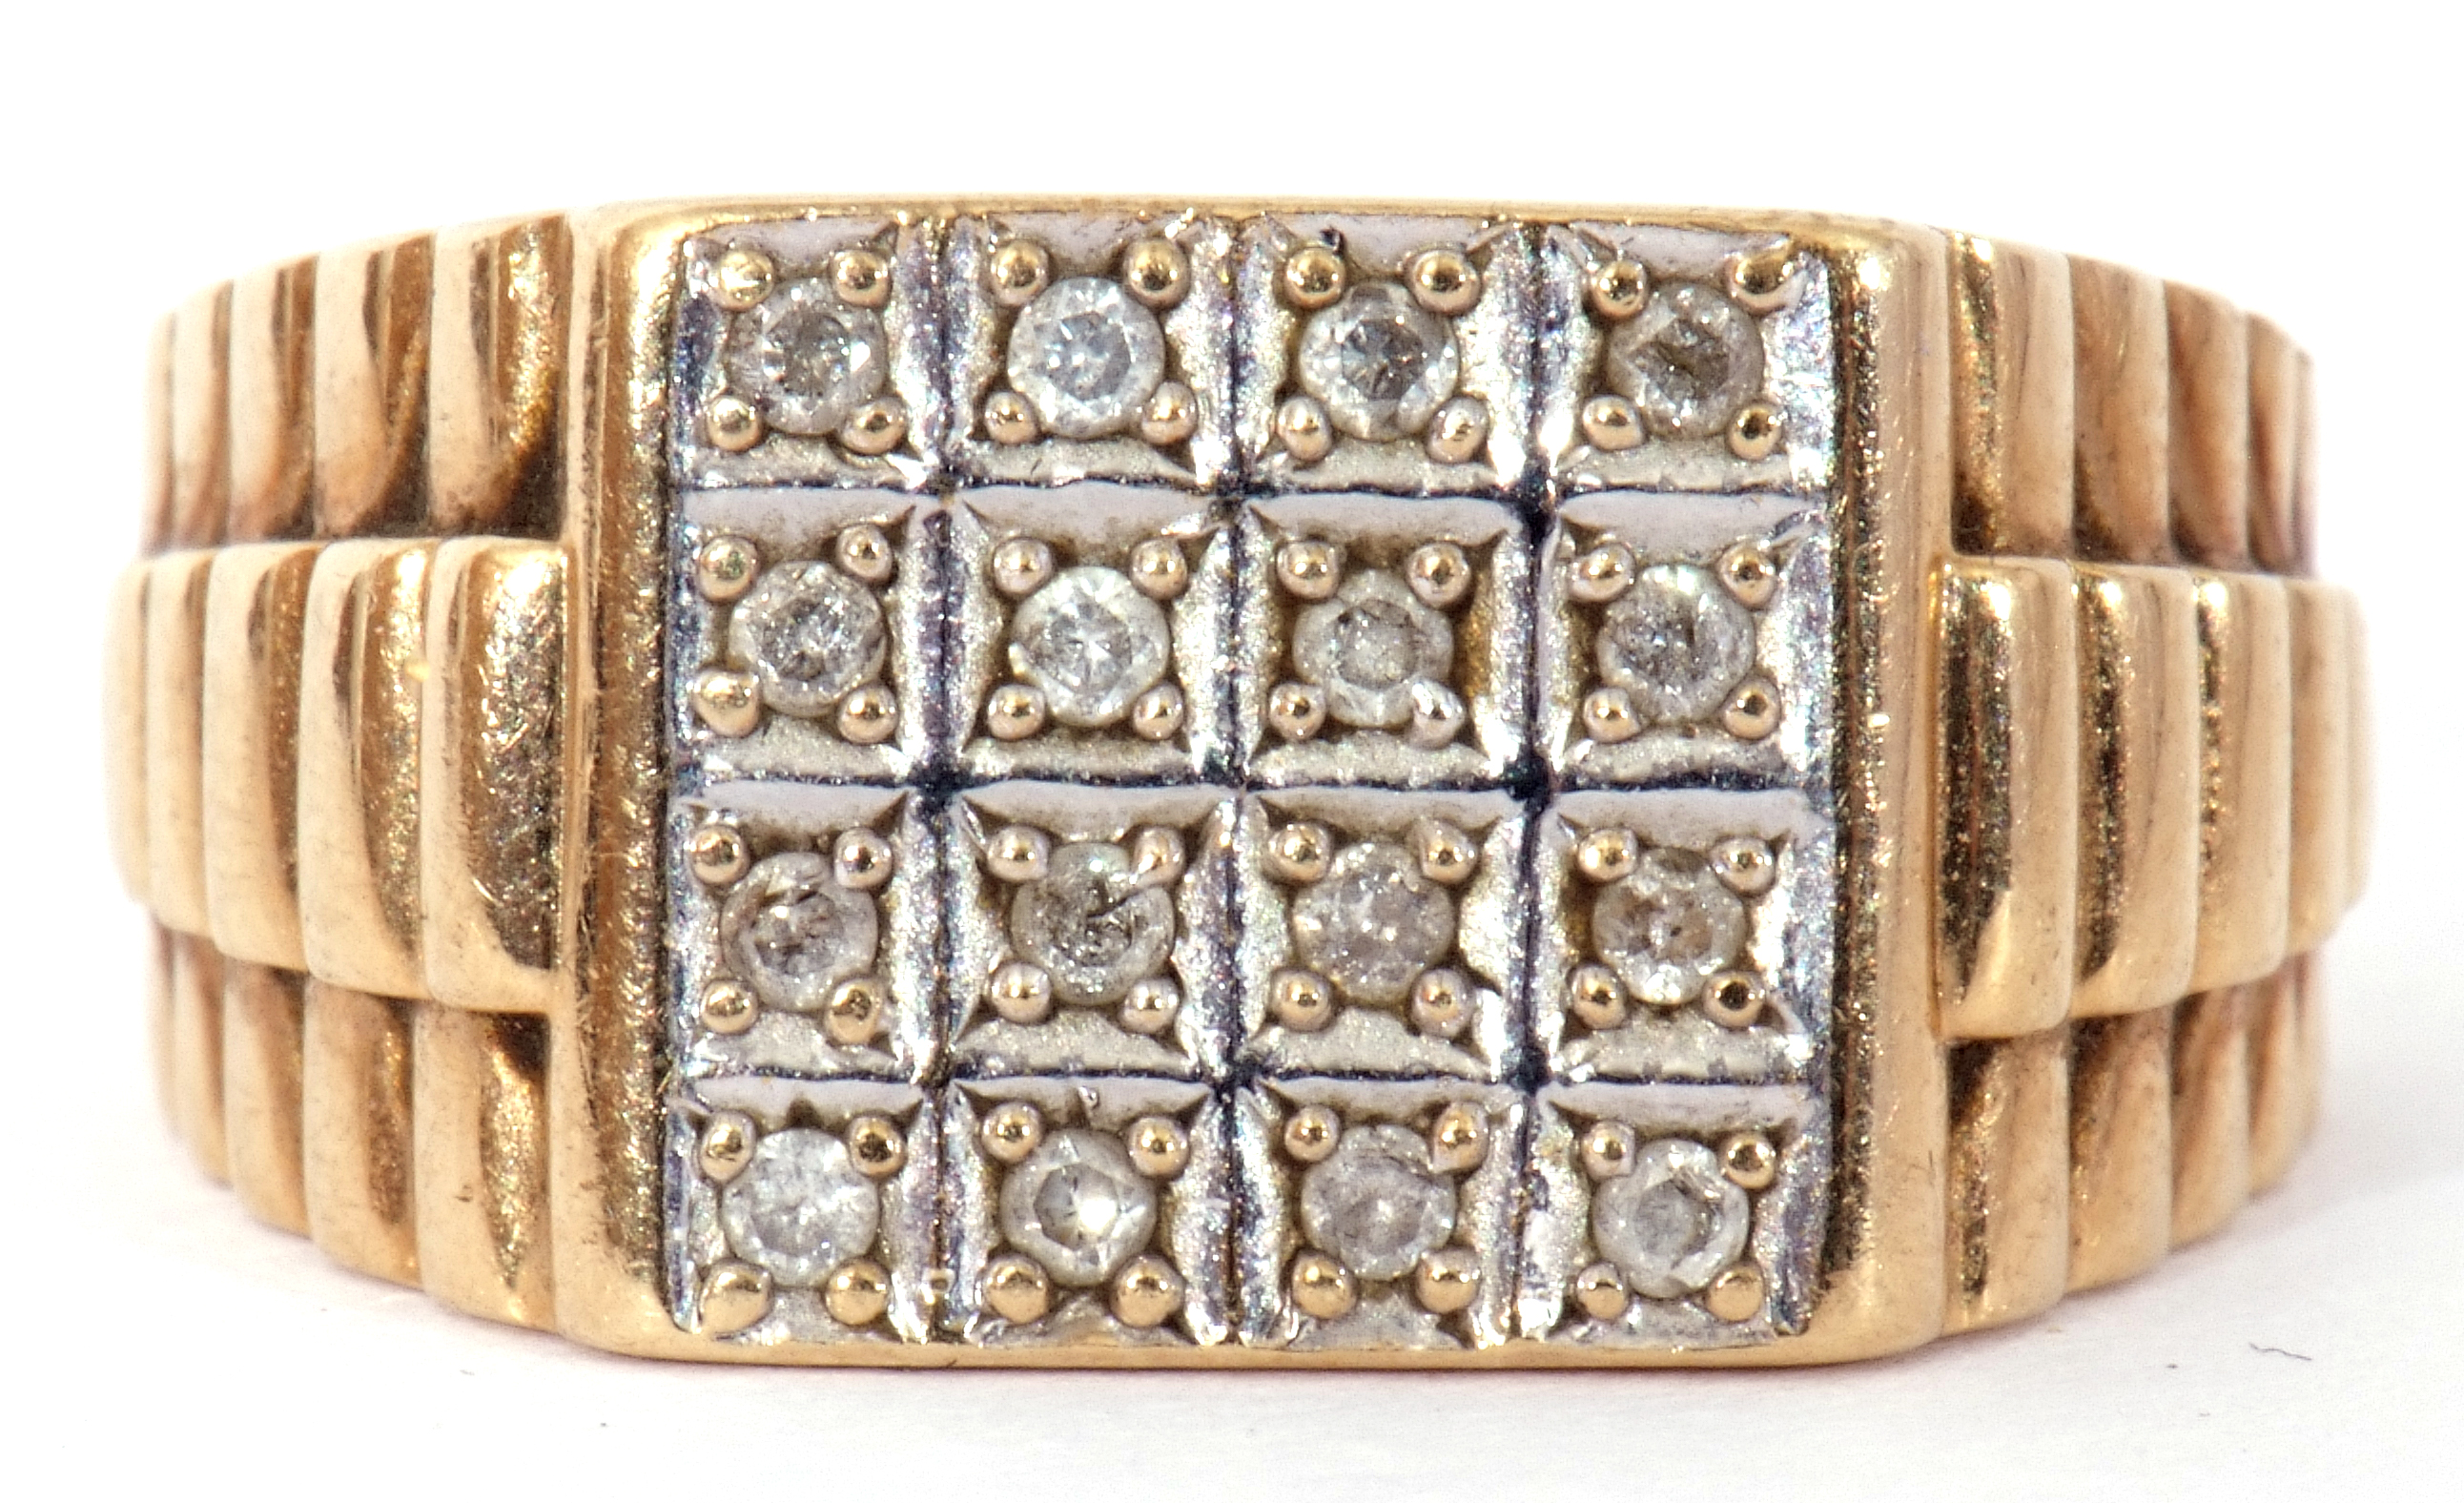 Gents 9ct gold and diamond ring, the square panel set with 16 small diamonds, set between textured - Image 2 of 8